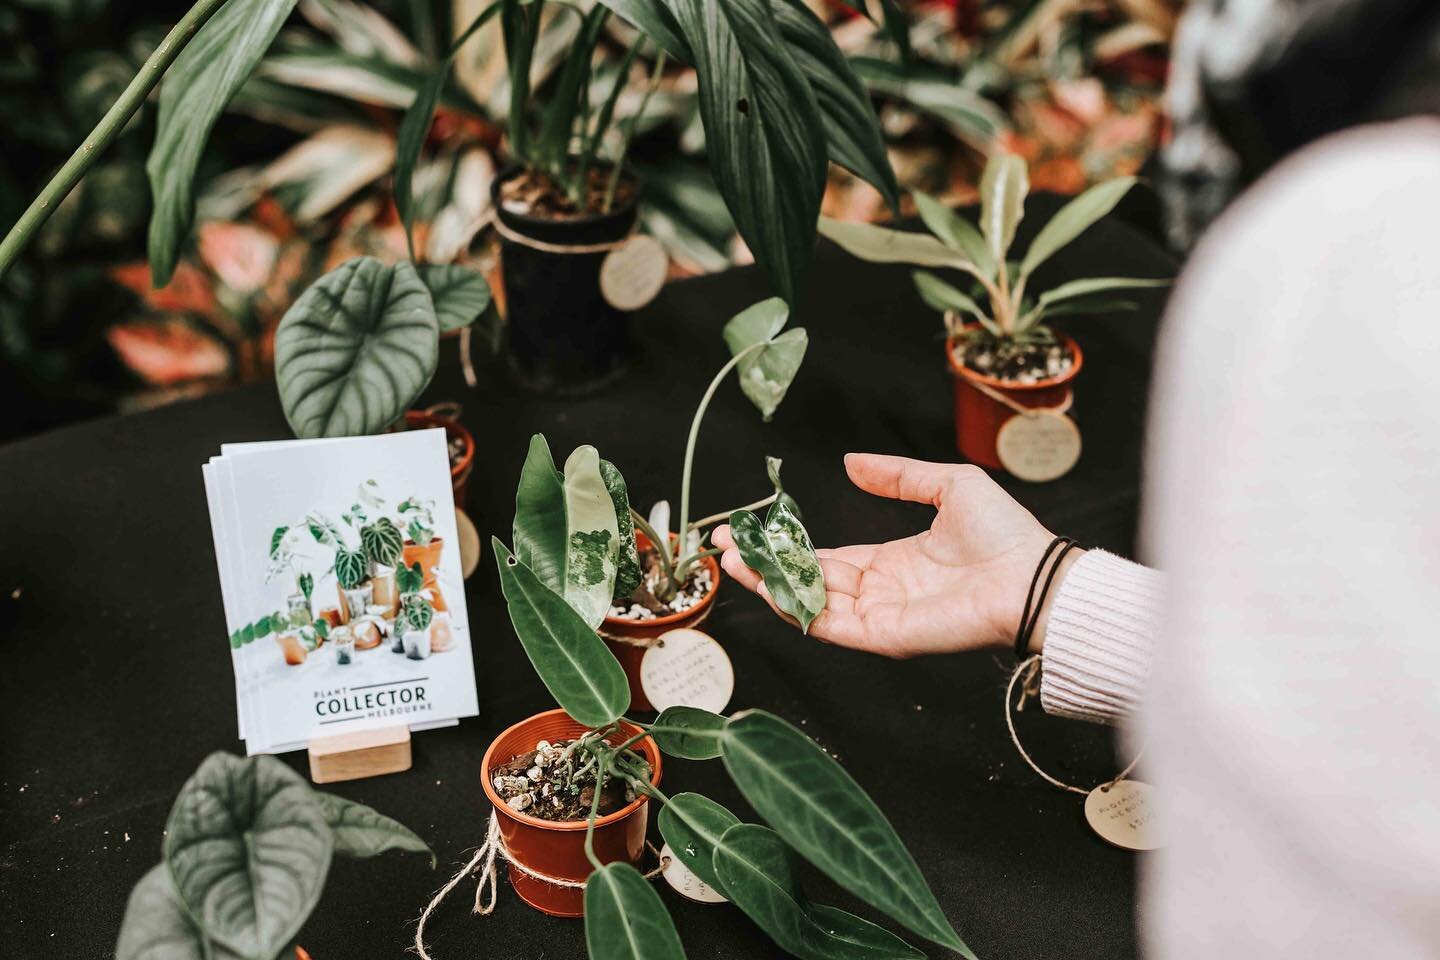 What is Sam bringing to the next PCM X @botanicah.melbourne Rare Plant Sale Event?

All your plant care needs from @gt_focus_on_plants_australia and @drgreenthumbs.onlinestore 🌿

And a shit tonne of plants!
* NEW RELEASES * 

Alocasia nebula 
Alocas